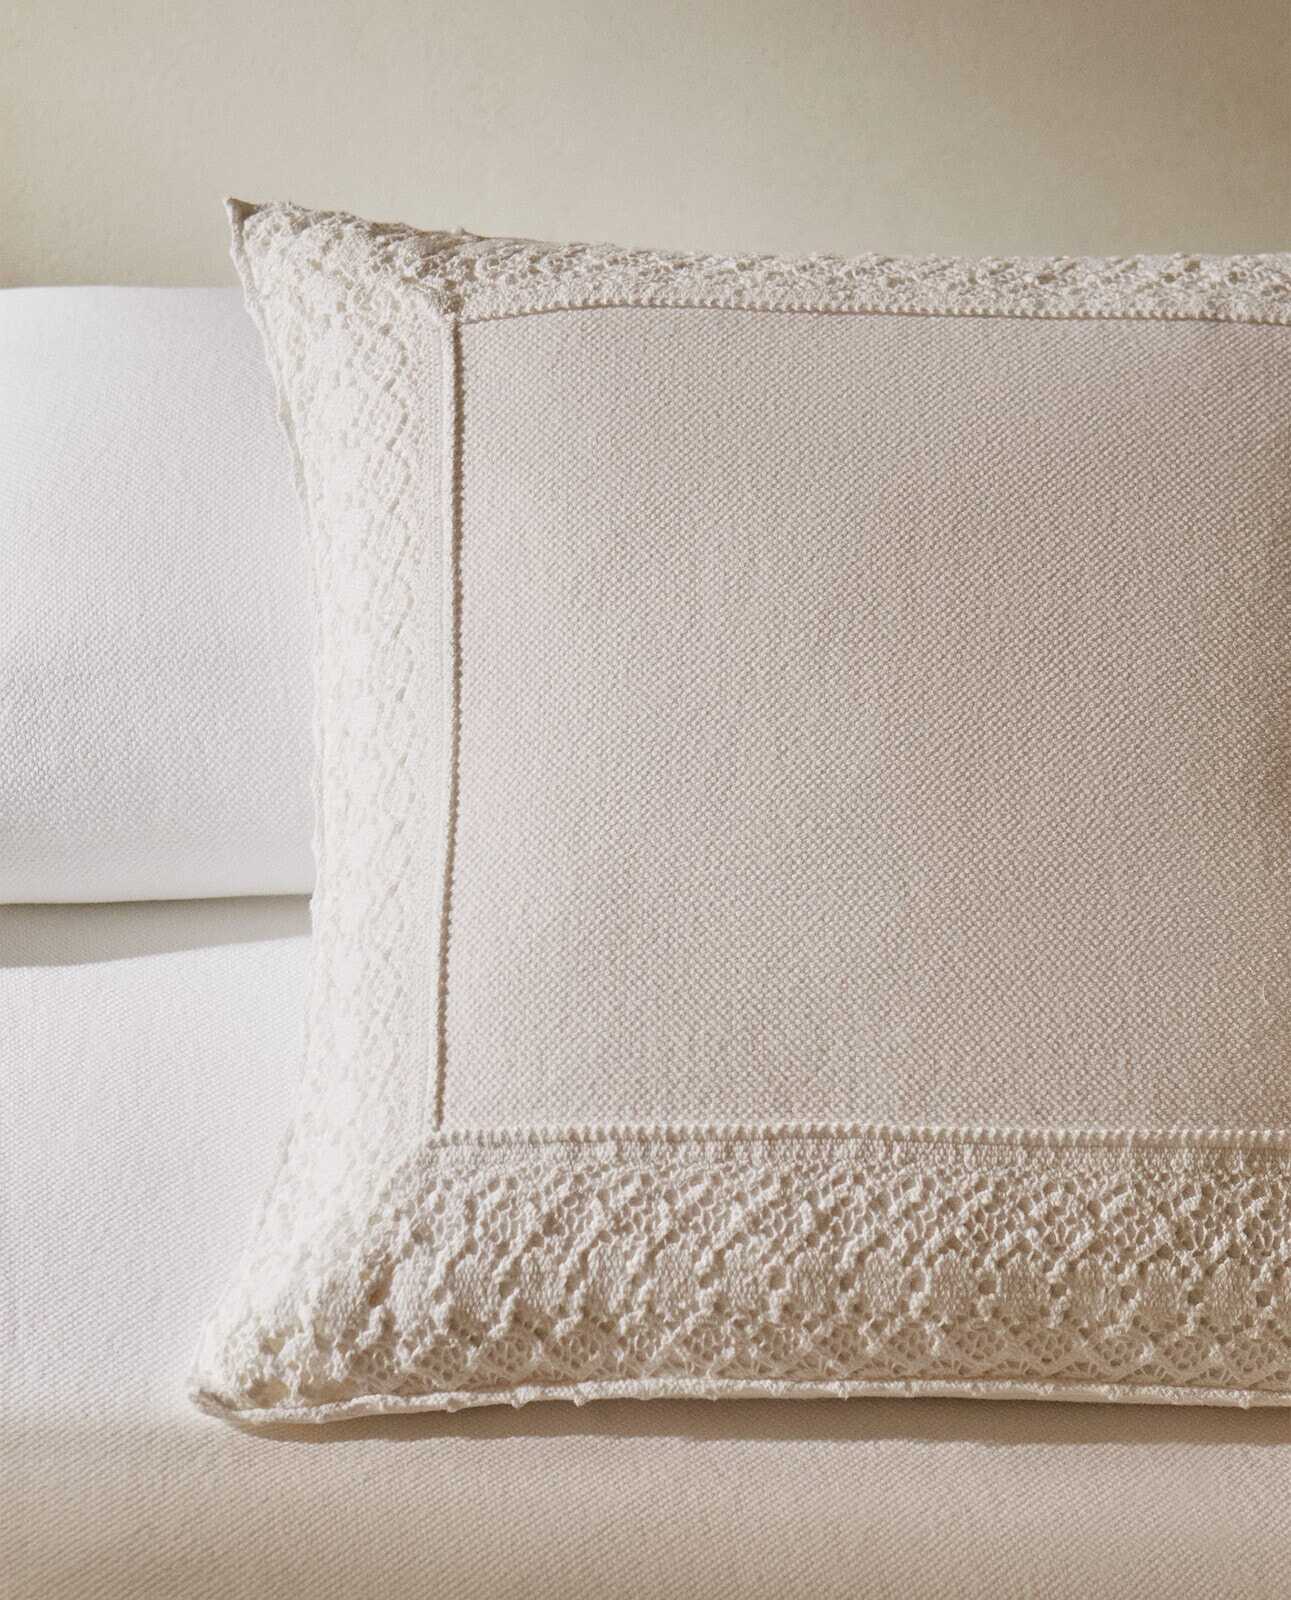 Cushion cover with lace trim